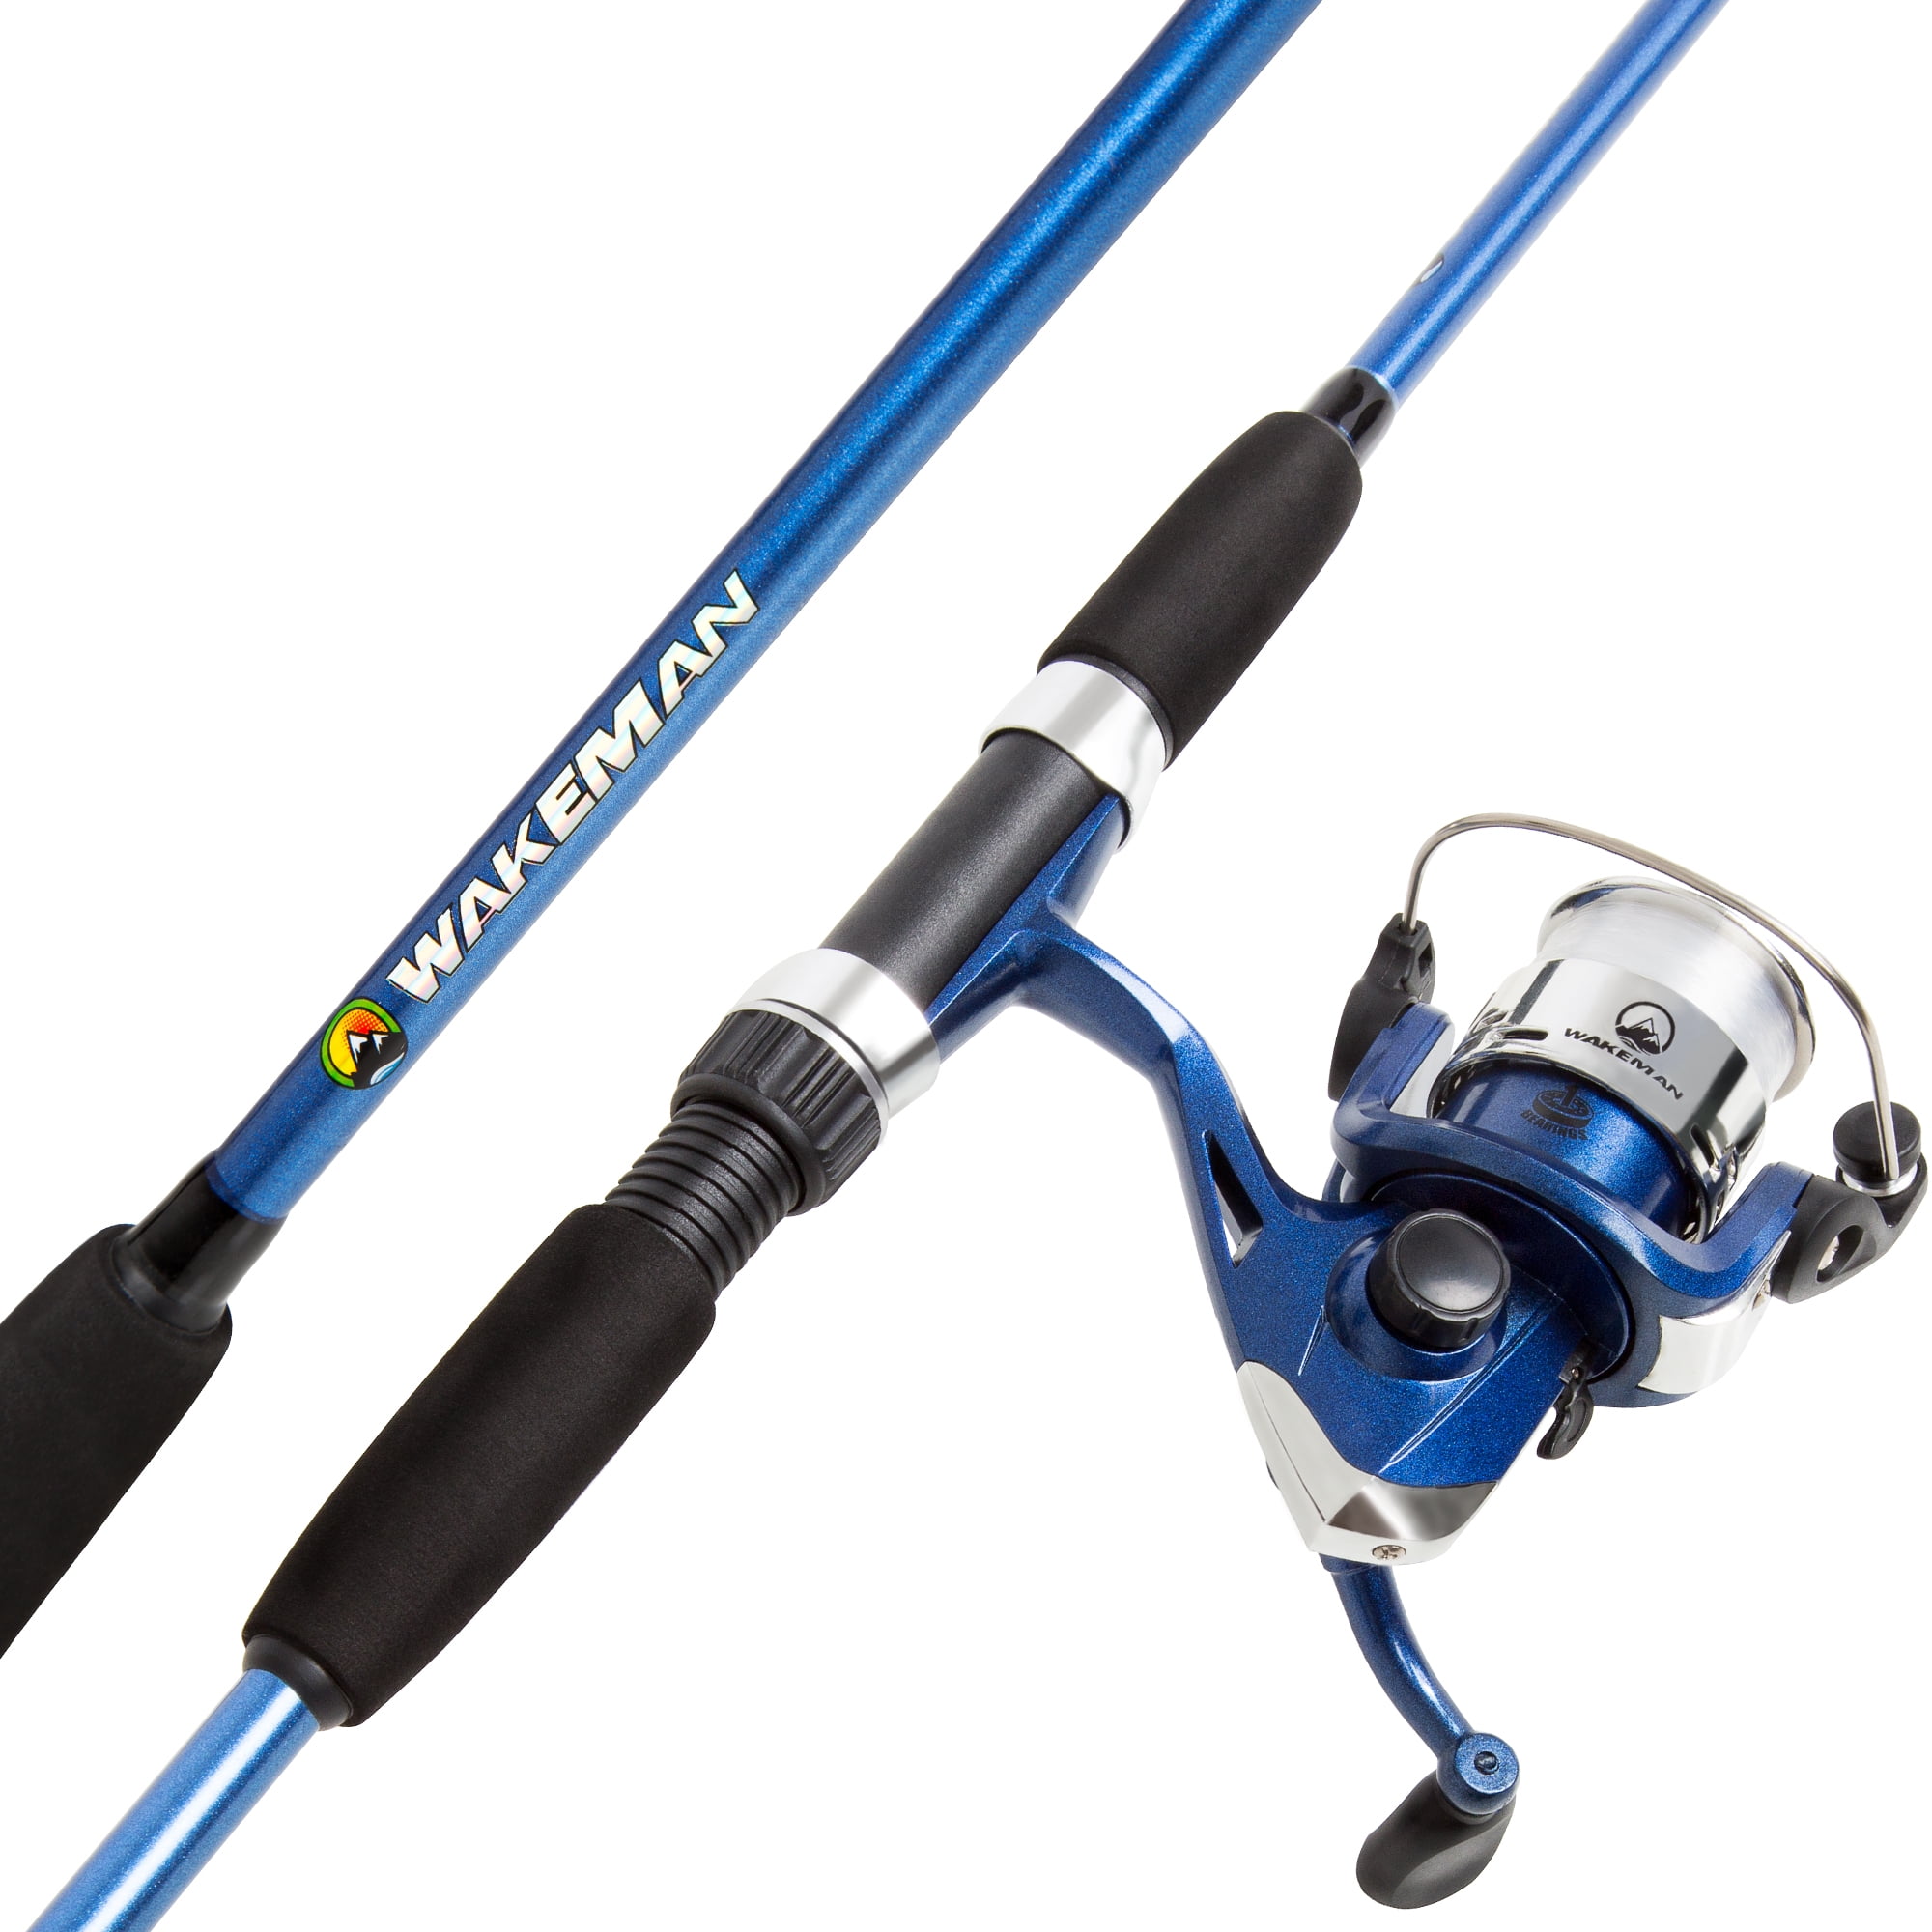 Wakeman Rose Gold 65 Spinning Rod and Reel Combo - Walmart